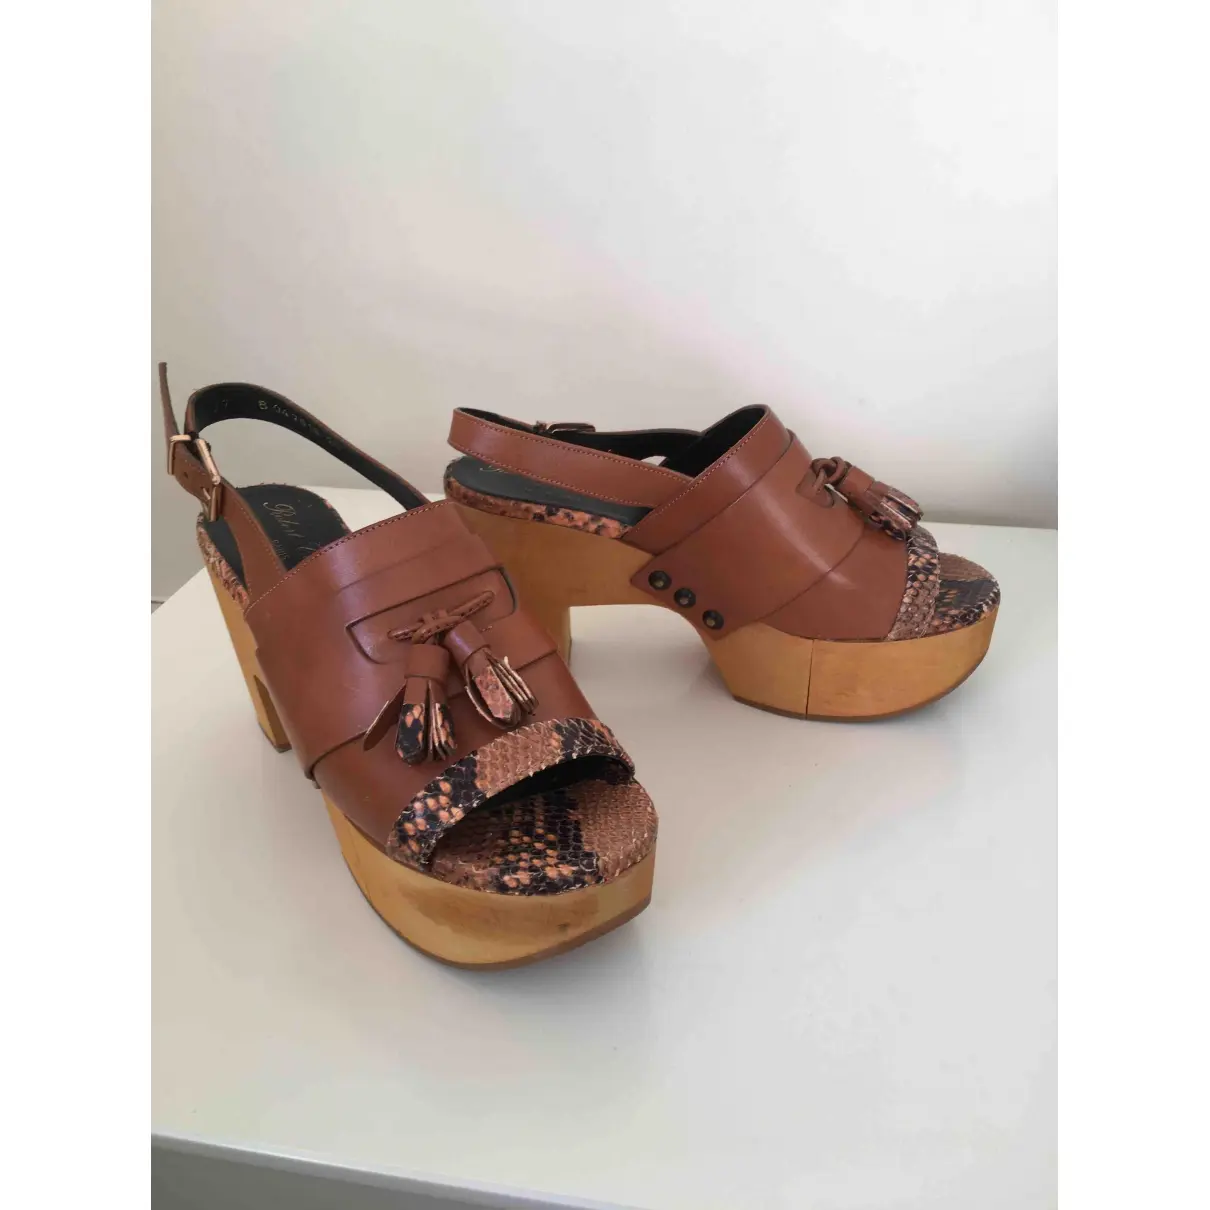 Buy Robert Clergerie Leather sandal online